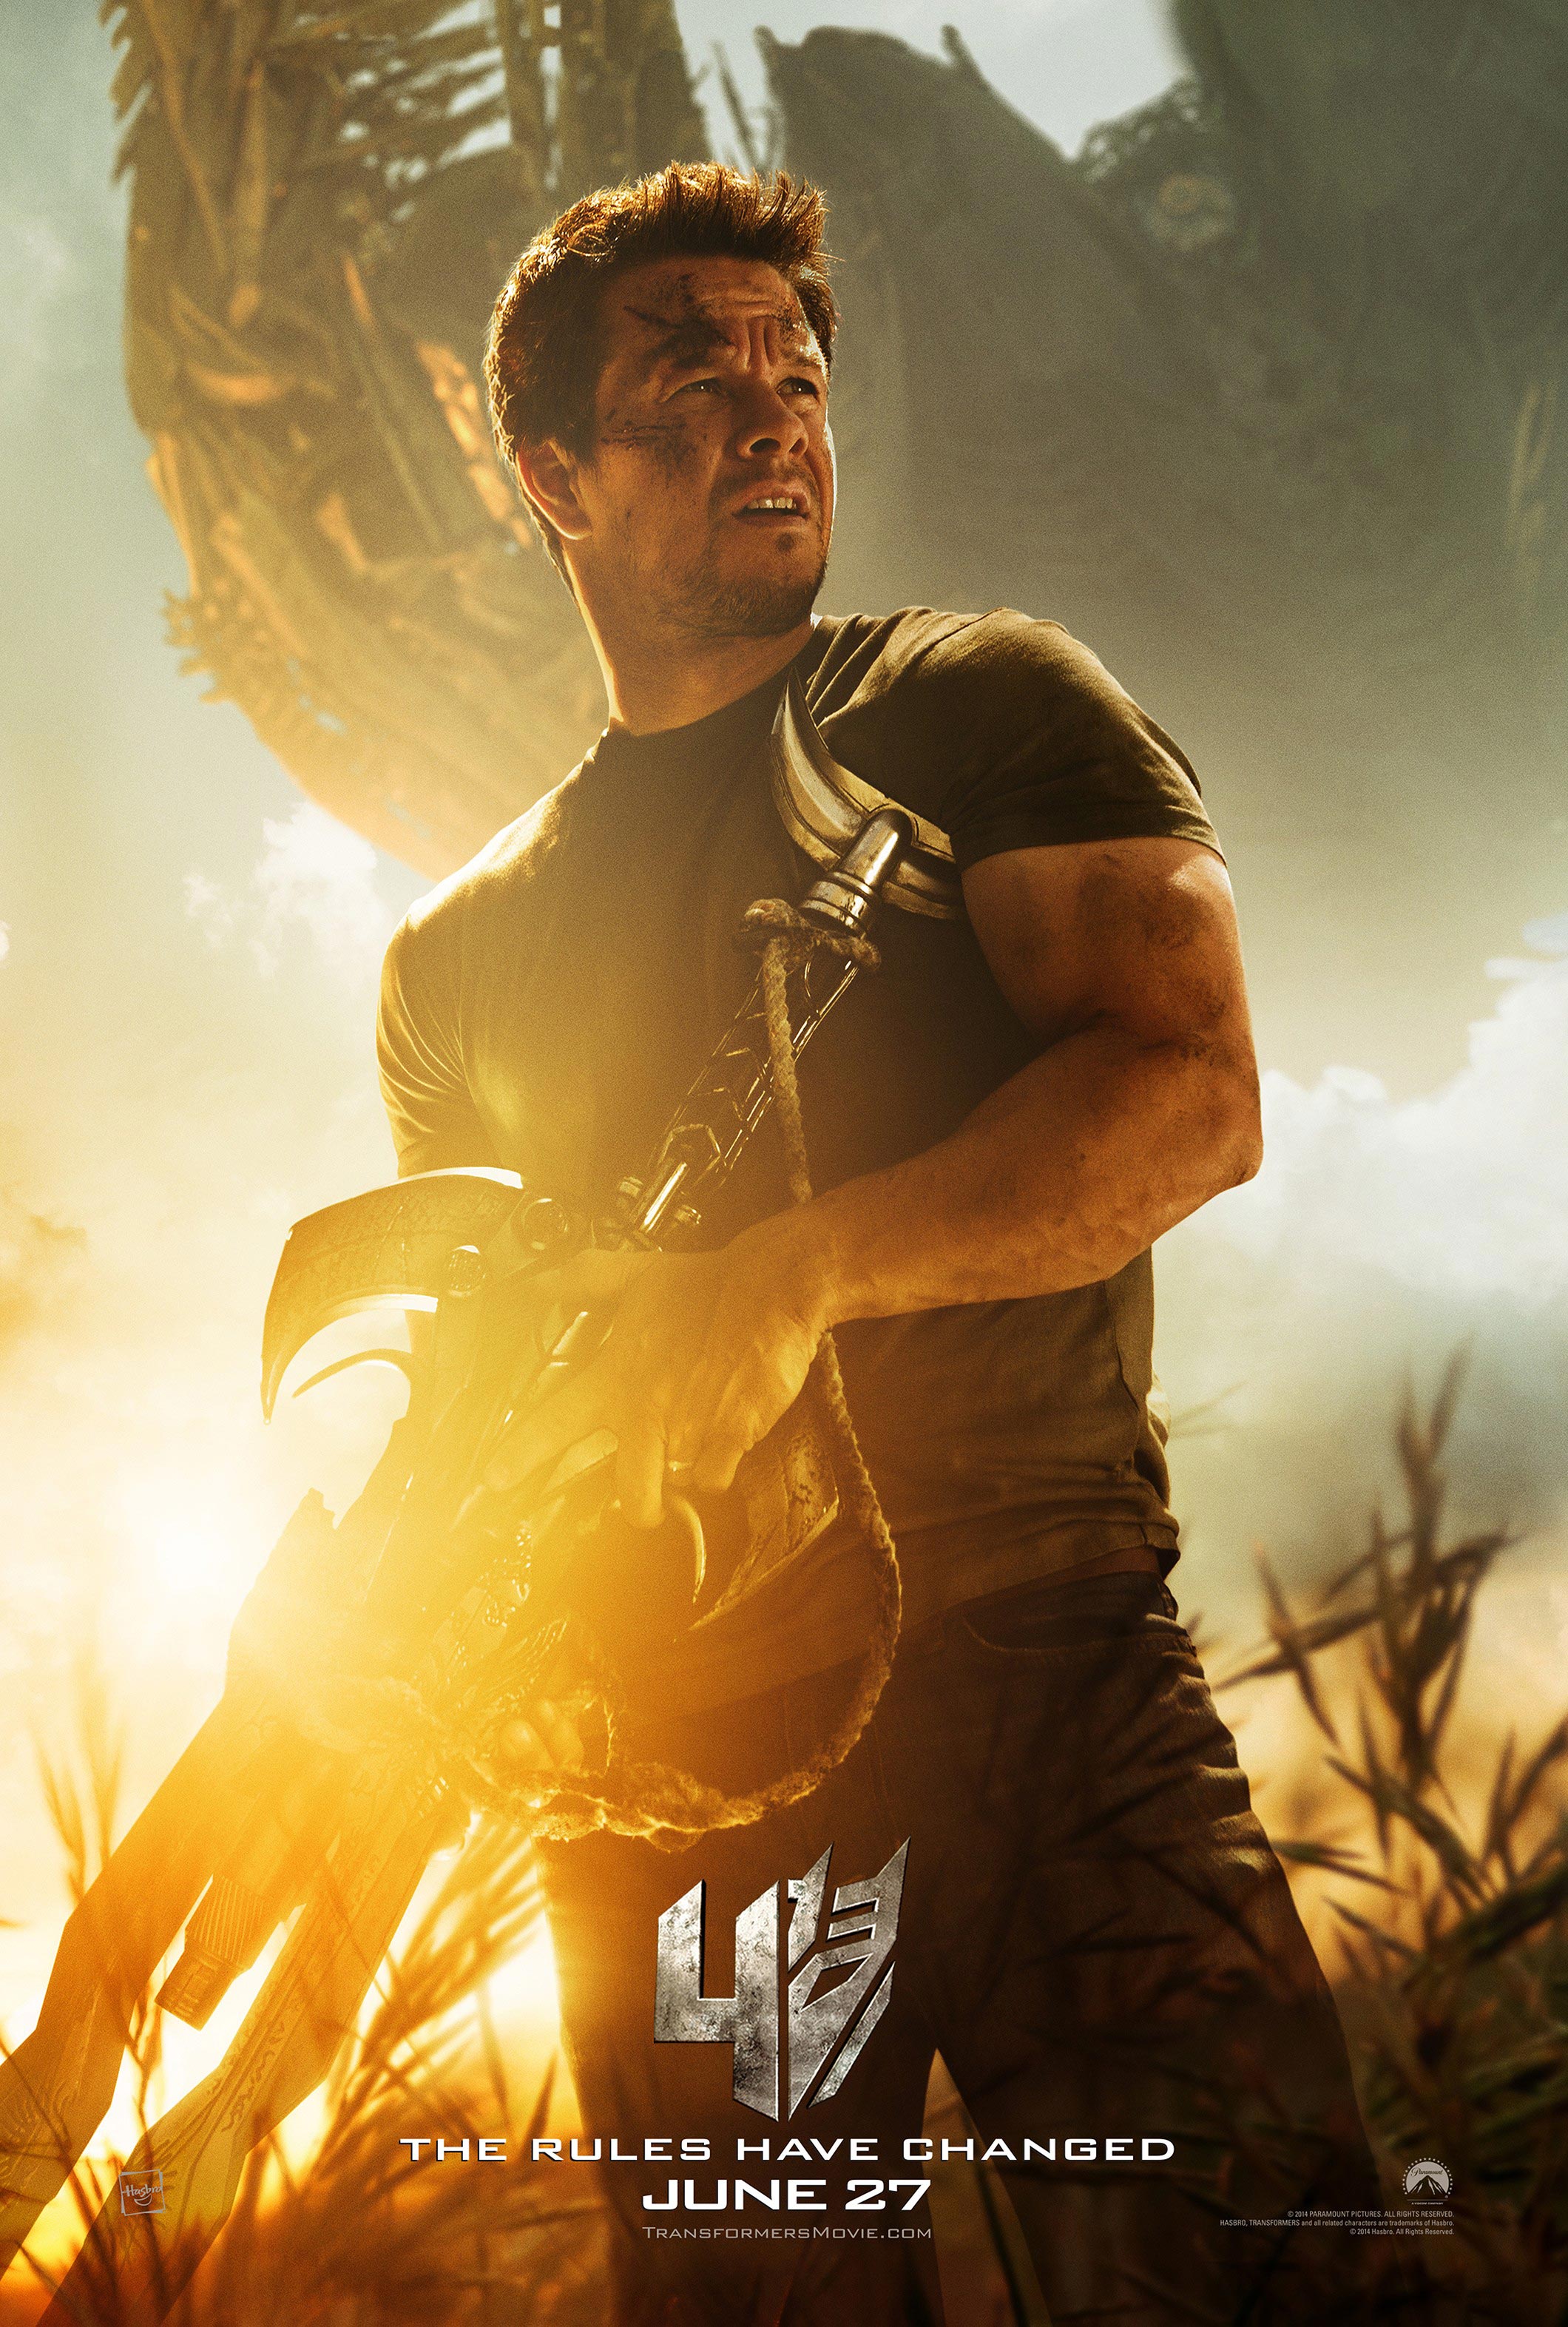 Transformers: Age of Extinction Movie Poster - ID: 85776 - Image Abyss